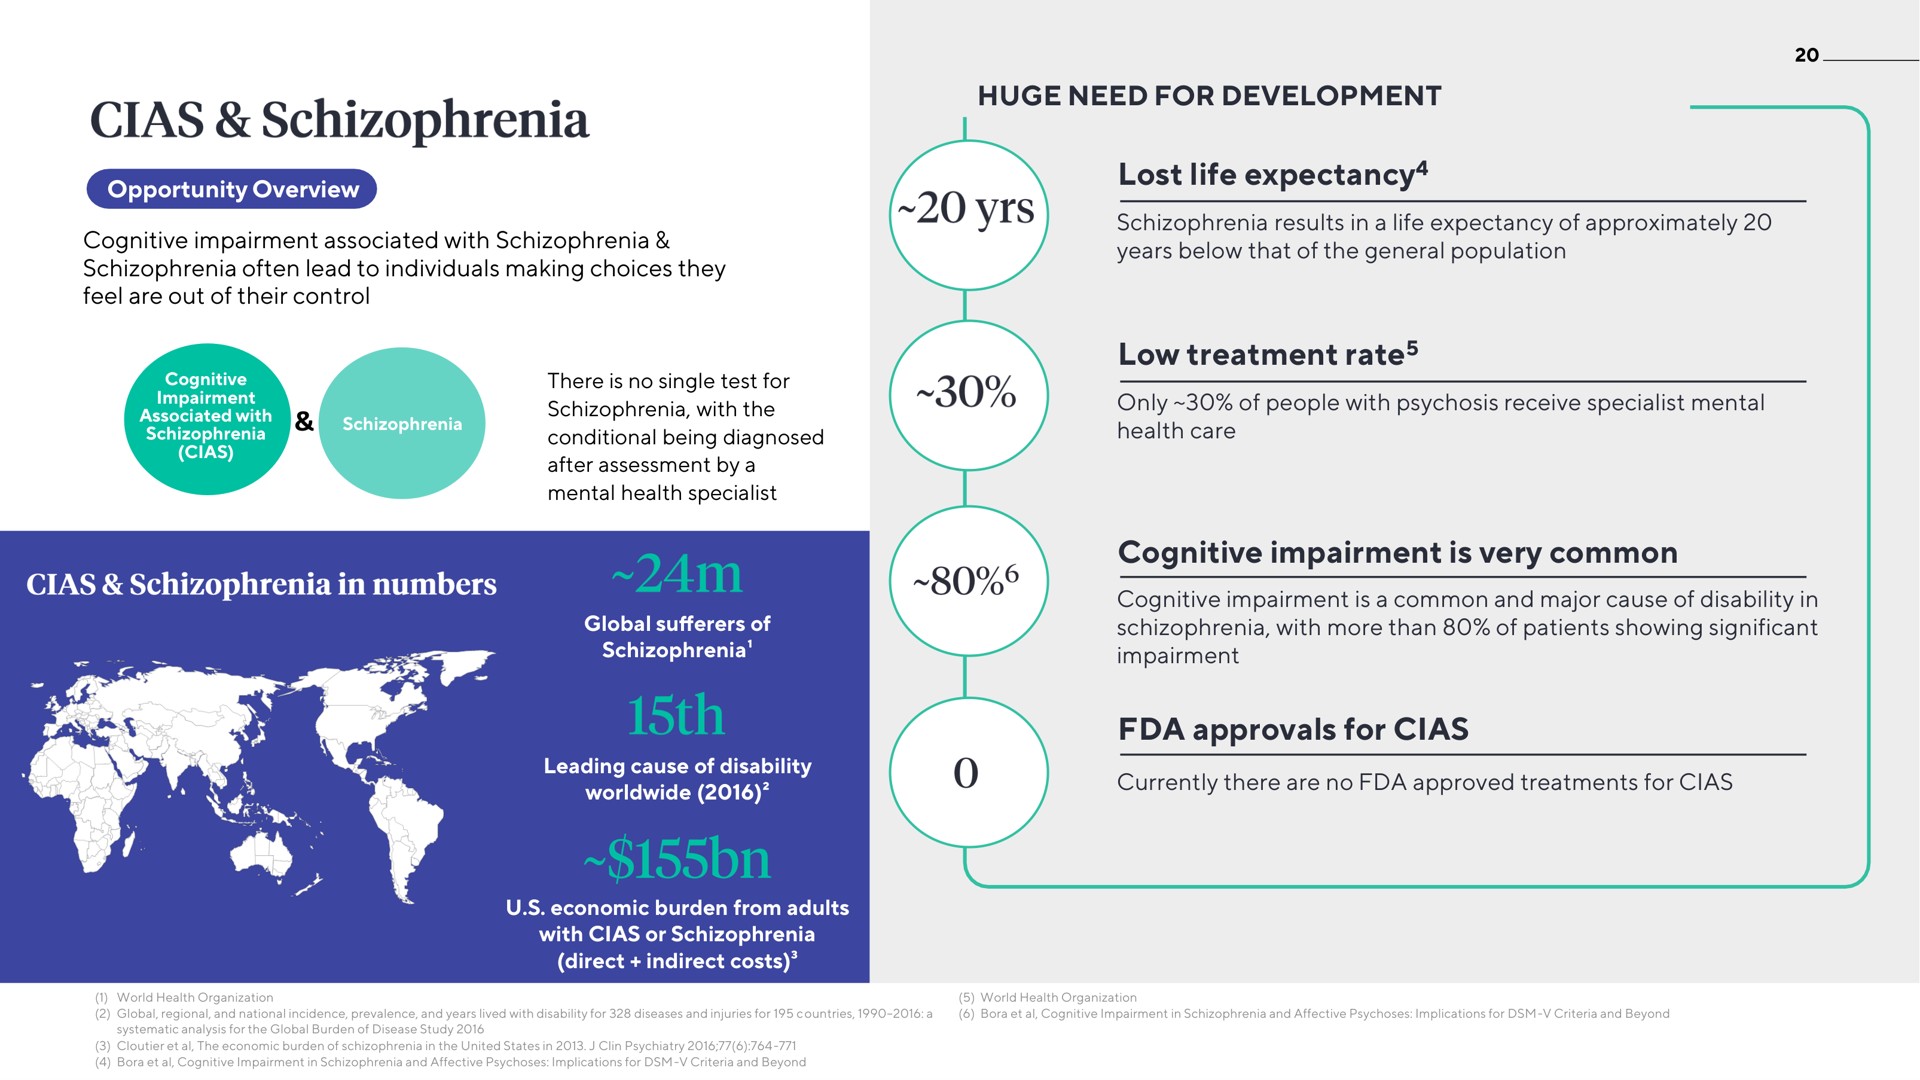 huge need for development lost life expectancy low treatment rate cognitive impairment is very common approvals for schizophrenia | ATAI